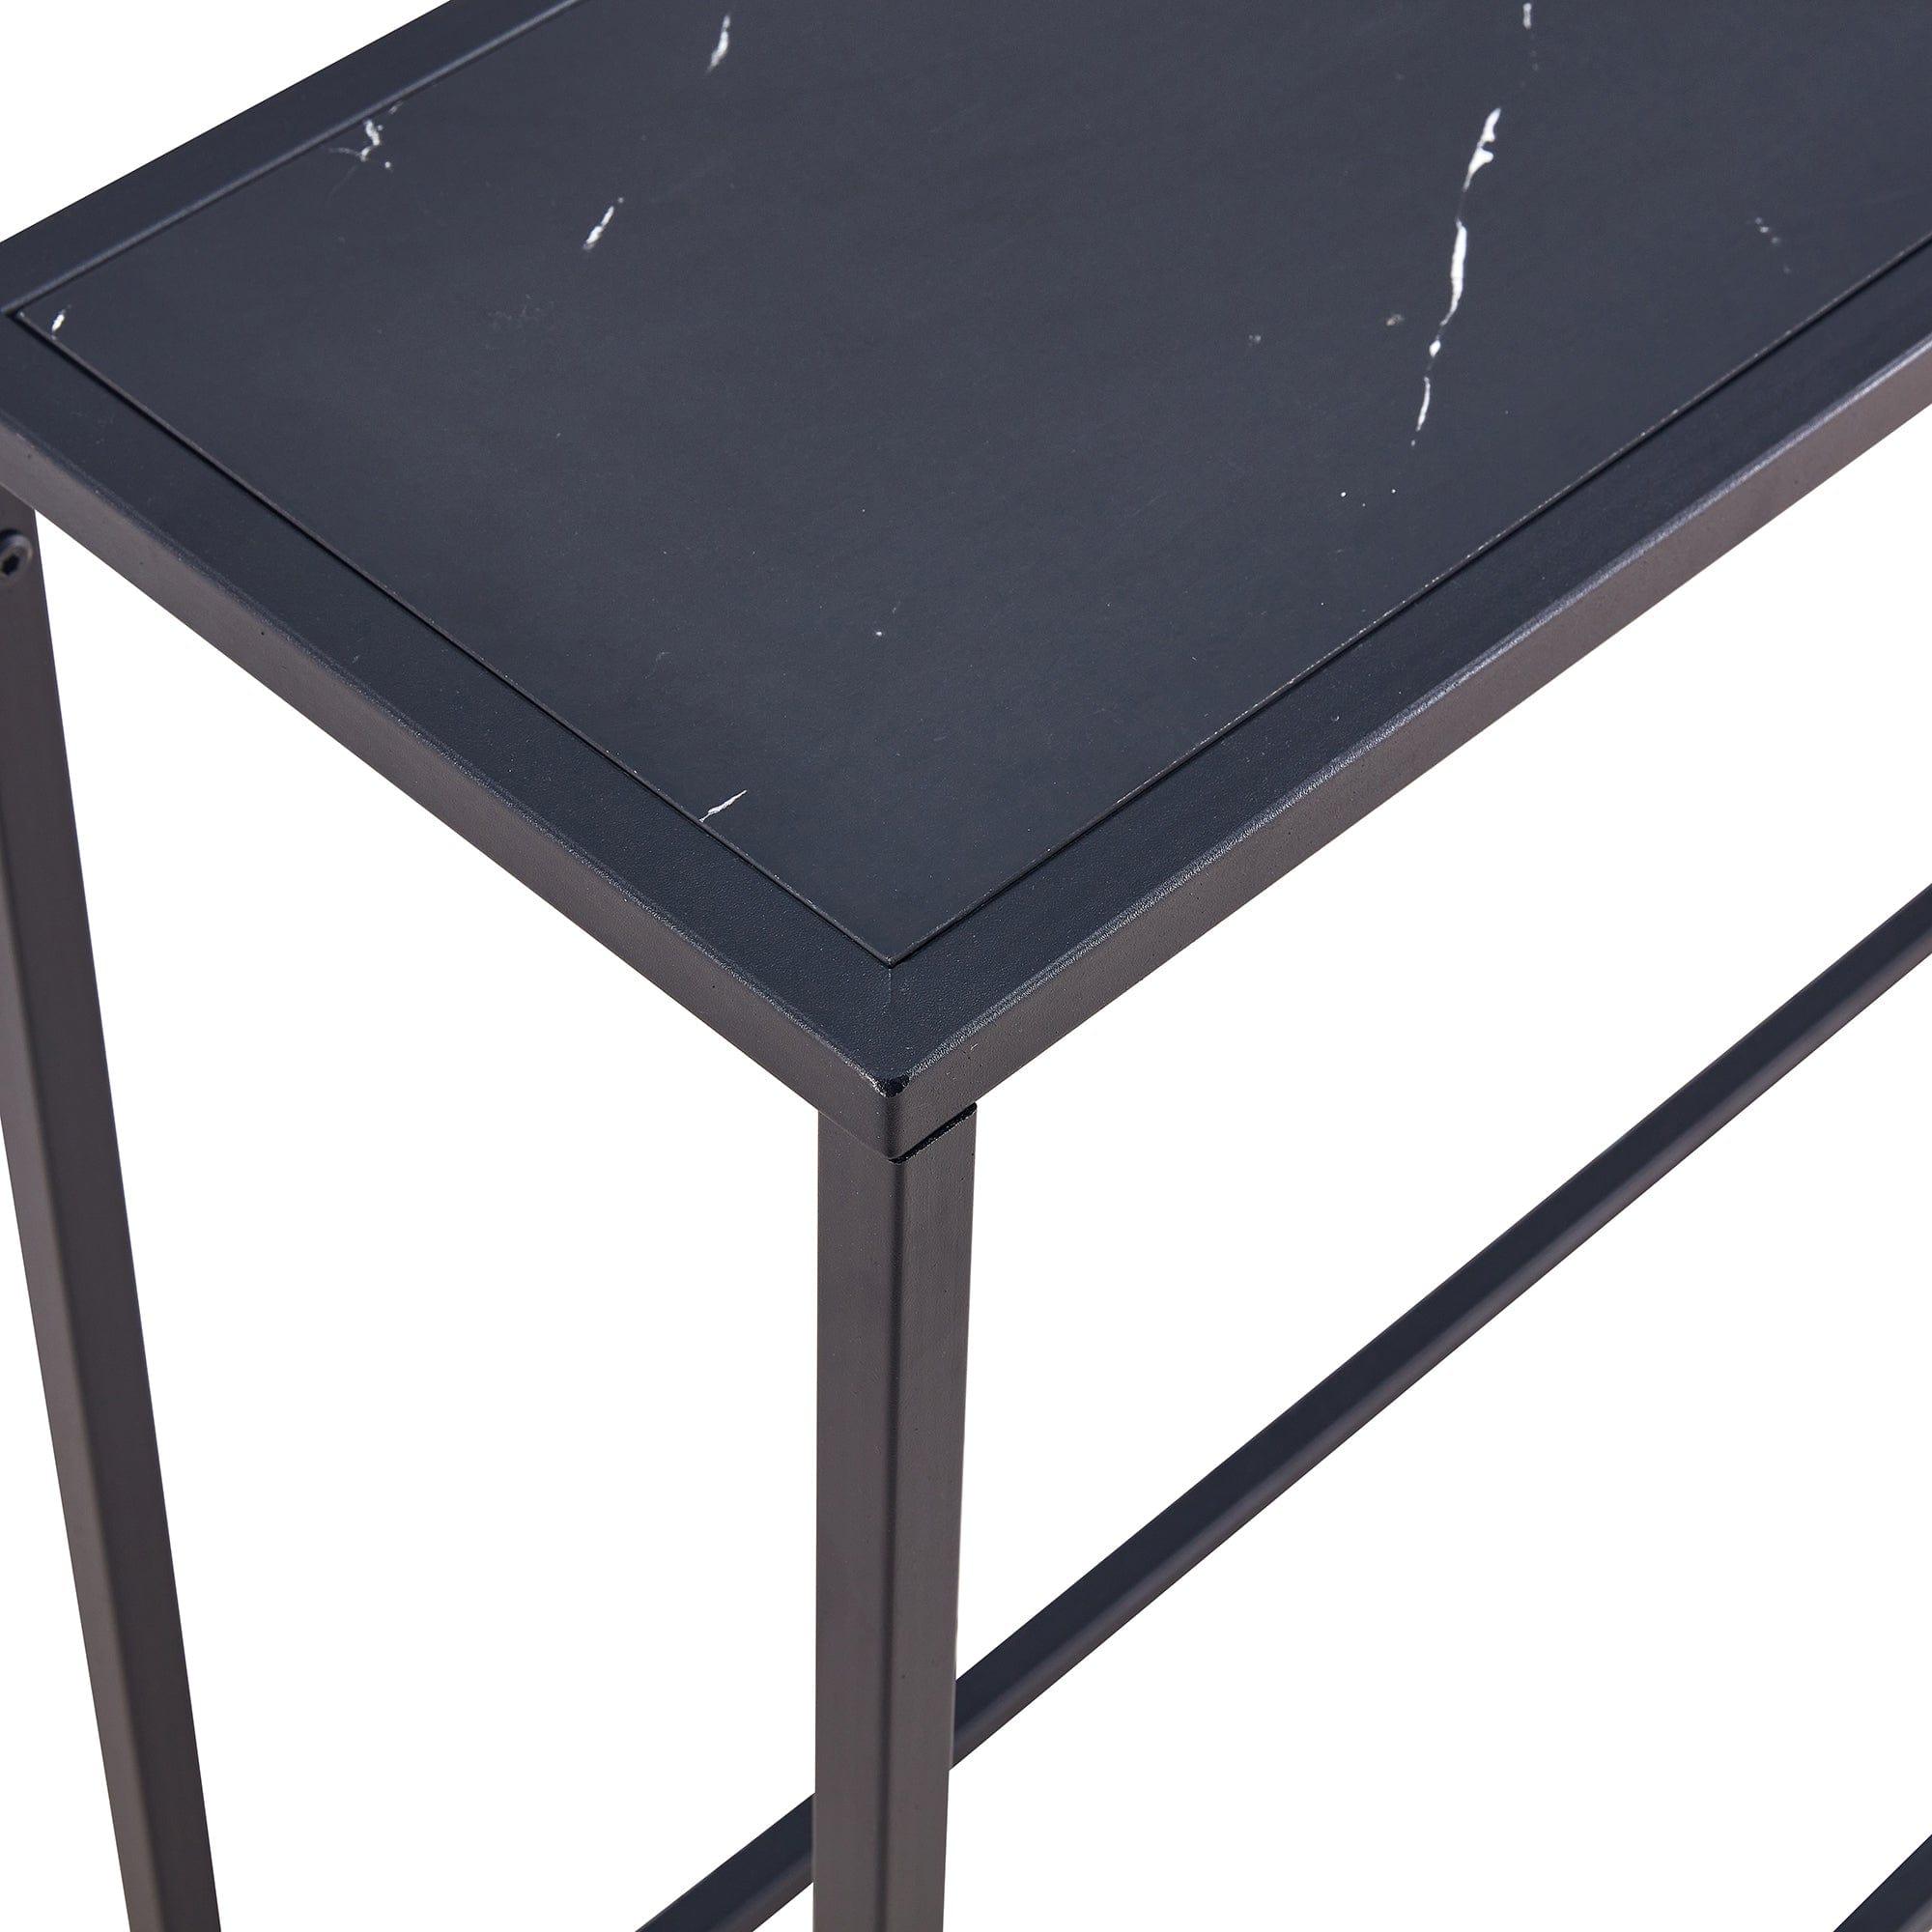 Shop D&N Console Talbe Minimalist Porch Table Sofa sidetable, MDF boards, metal frame , Rectangle shape, Black,41.73''L 11.2''W 29.92''H Mademoiselle Home Decor